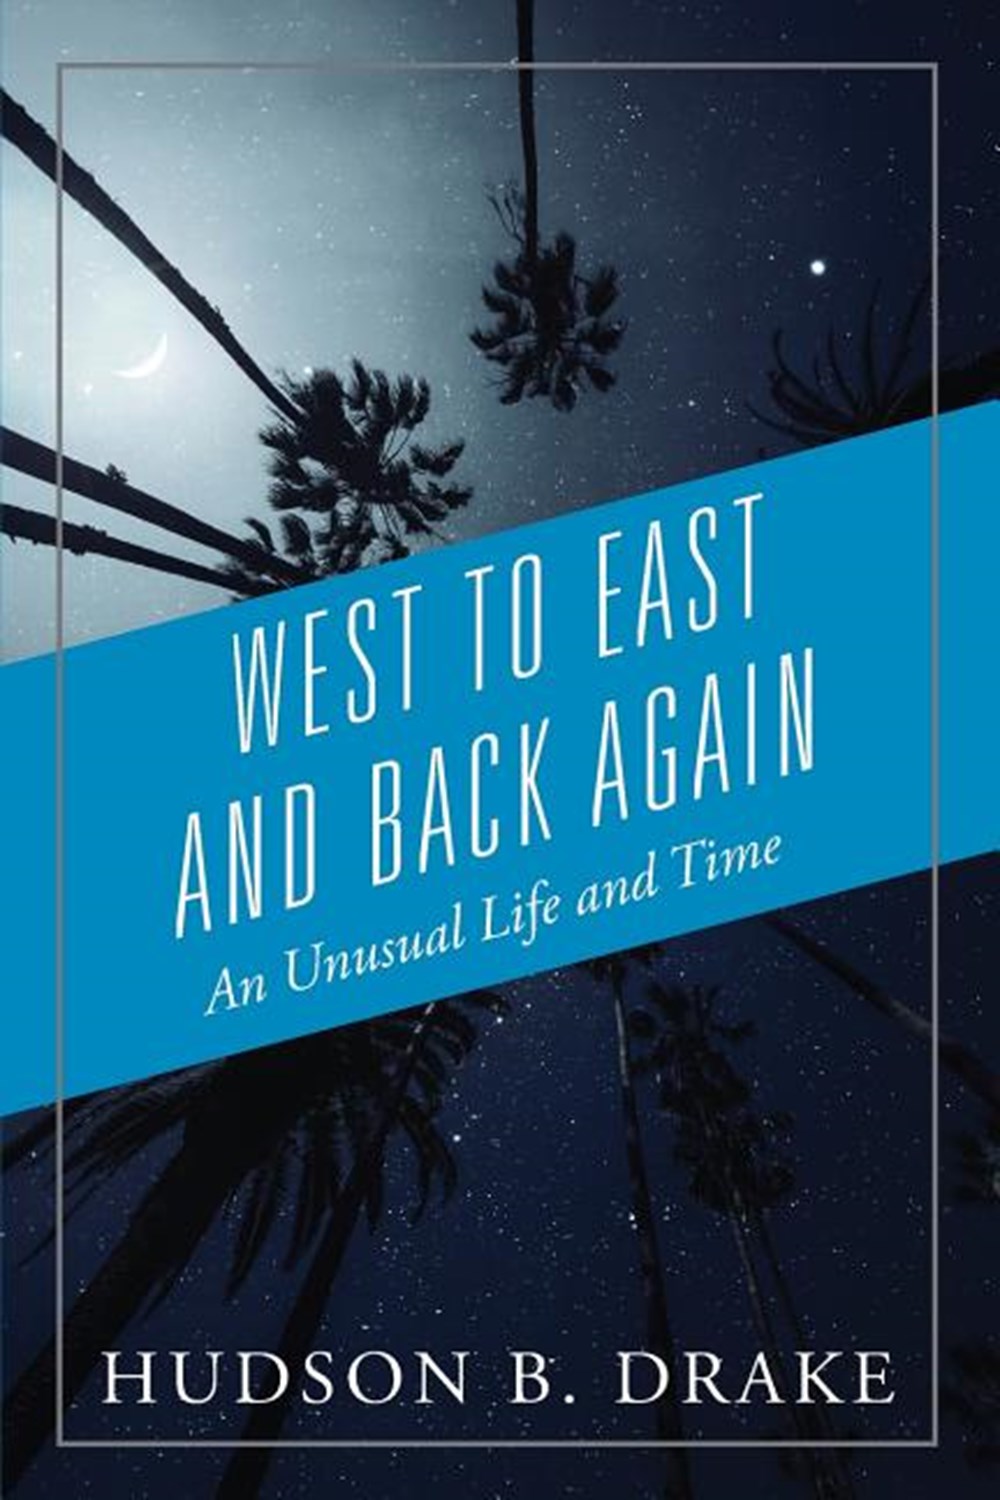 West to East and Back Again An Unusual Life and Time